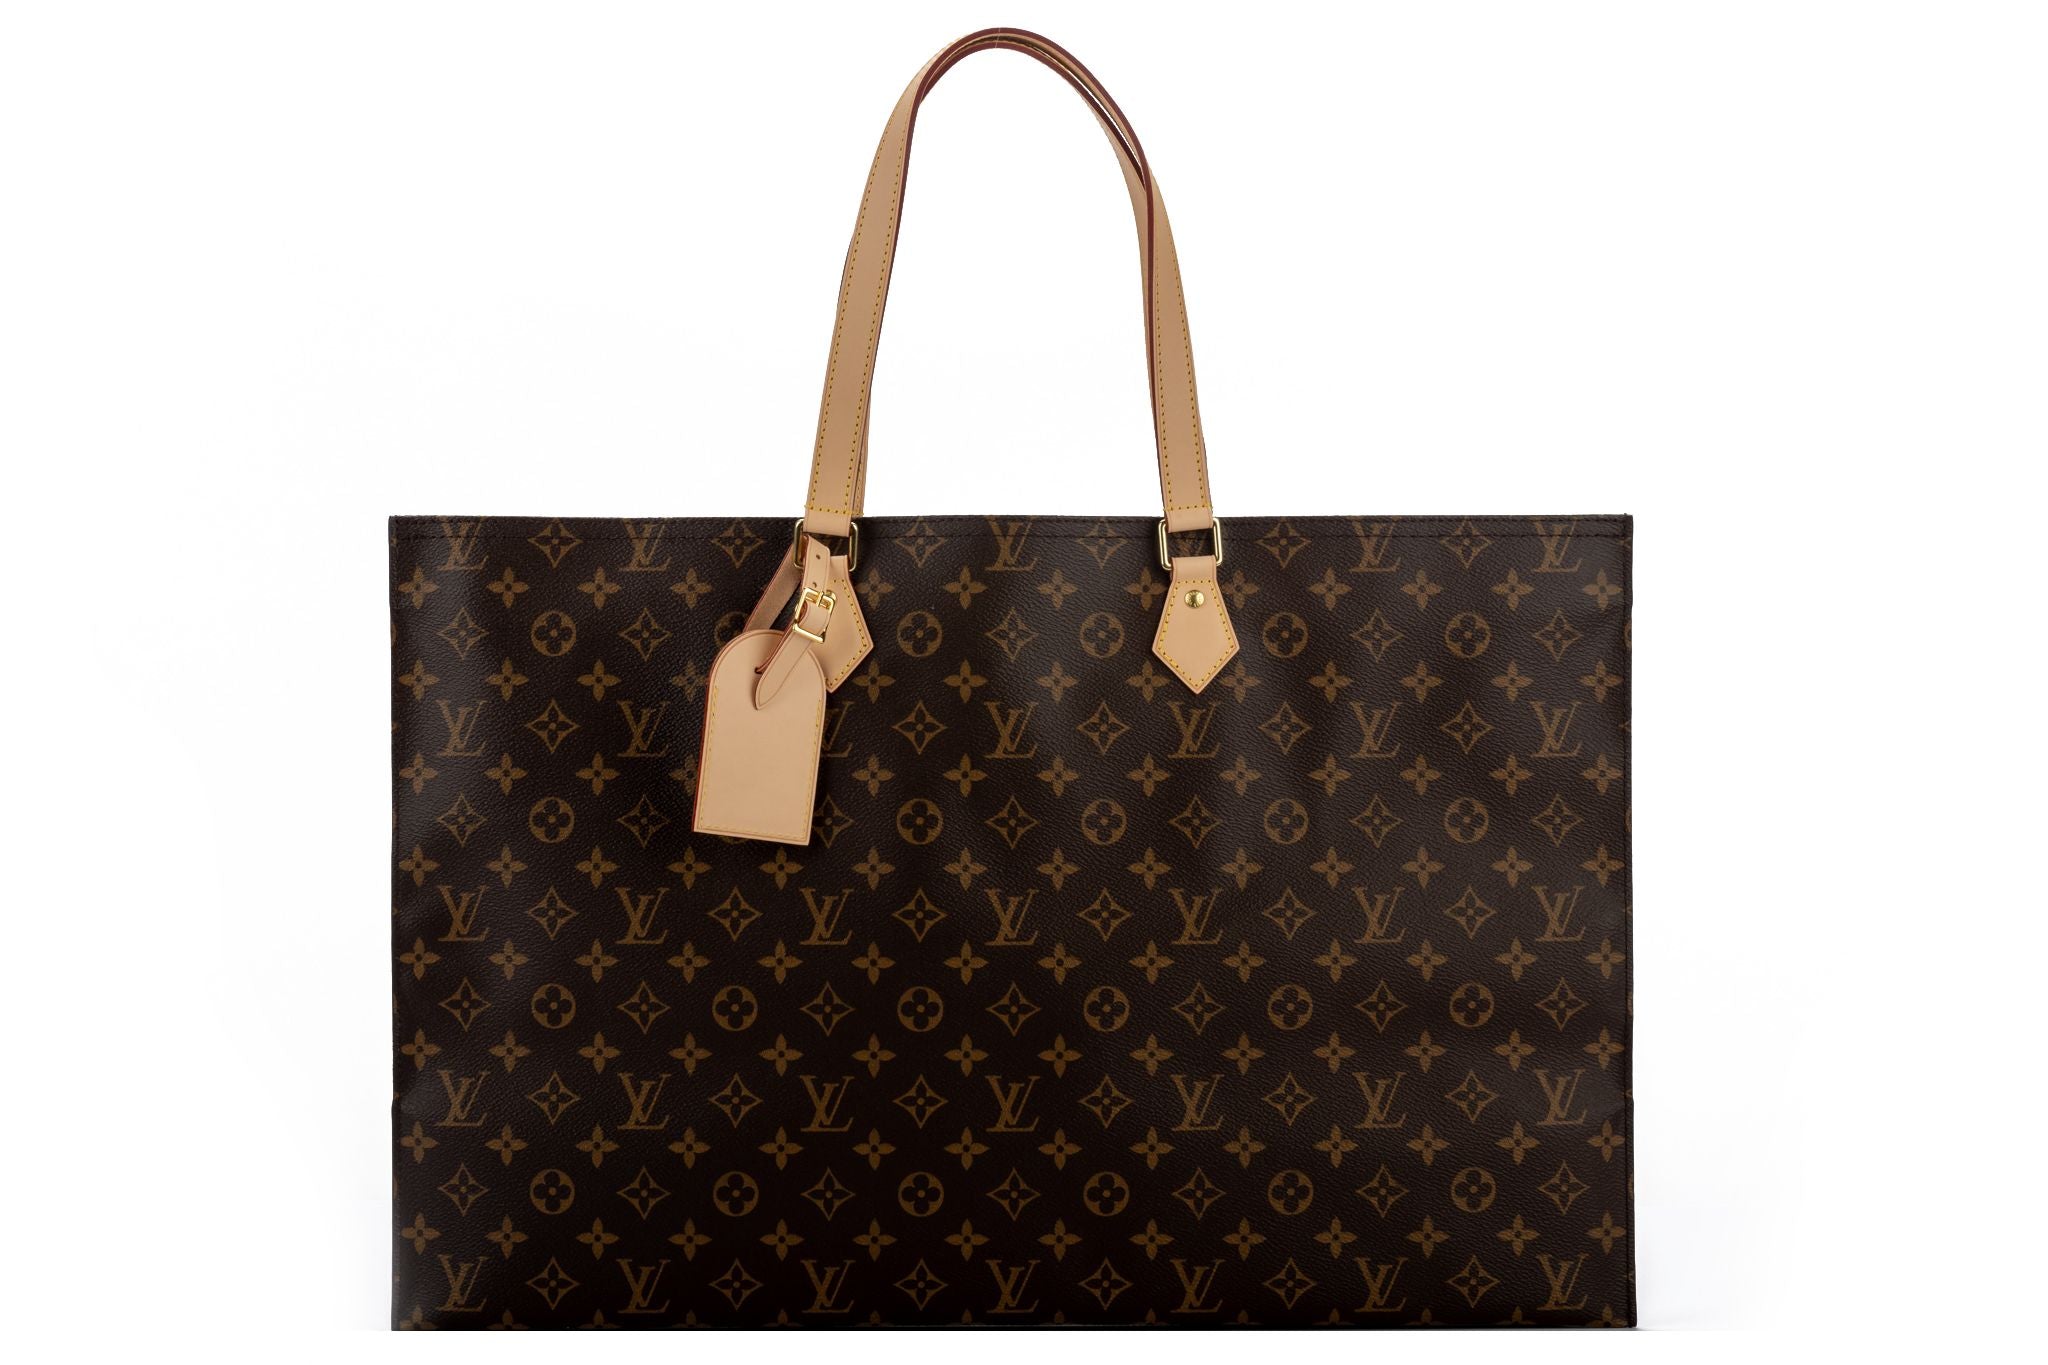 louis vuitton weekender products for sale